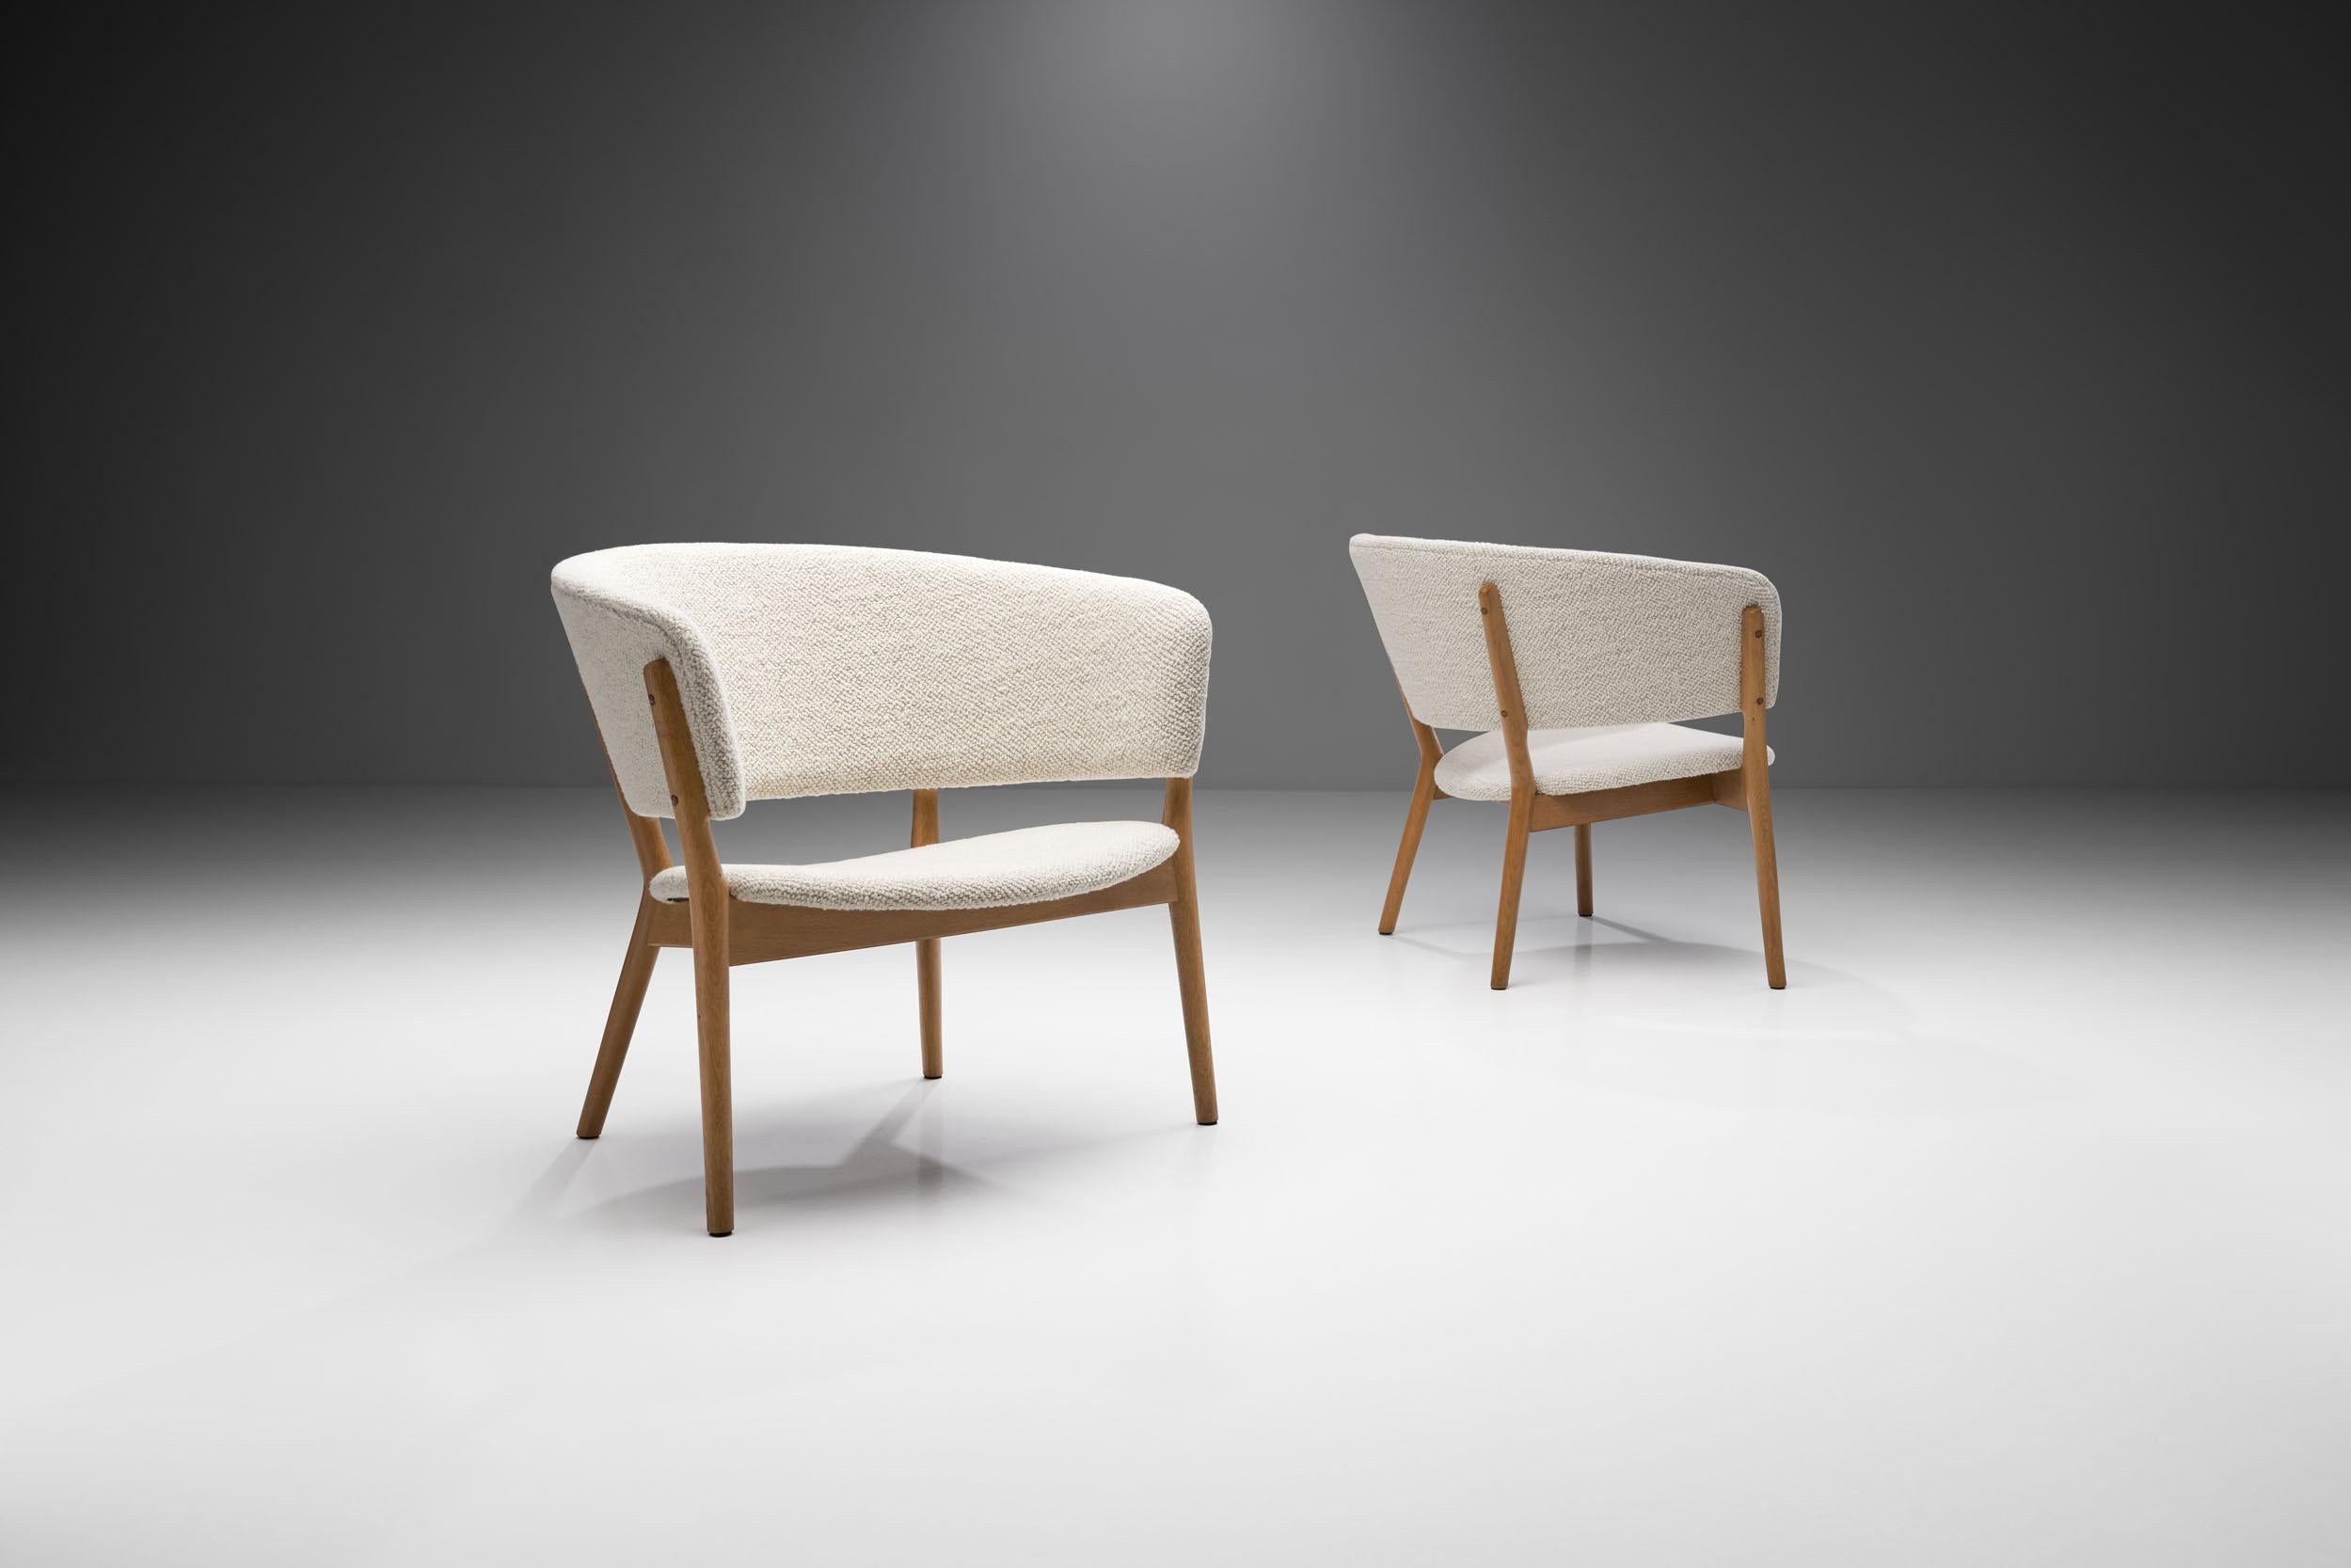 This pair of armchairs is what we consider a timeless Danish modern classic. The “ND83” was designed in 1952 by Nanna Ditzel for the exhibition 'Today’s Furniture, Home Equipment' in the Forum Hall Copenhagen in 1952.

Chairs are often considered